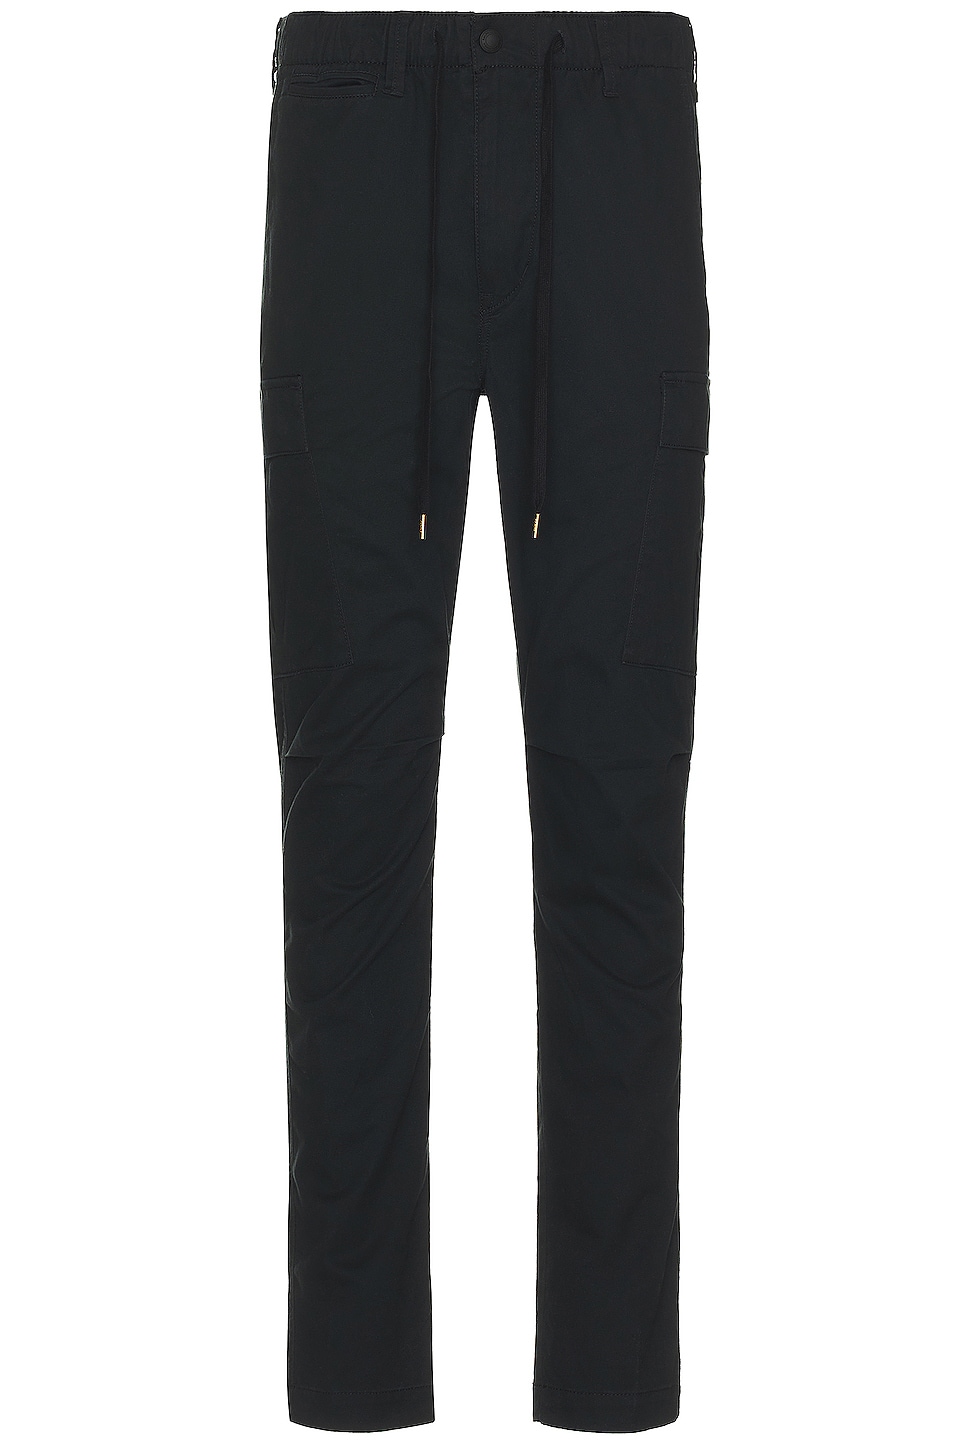 Image 1 of Polo Ralph Lauren Cargo Pants in Polo Black